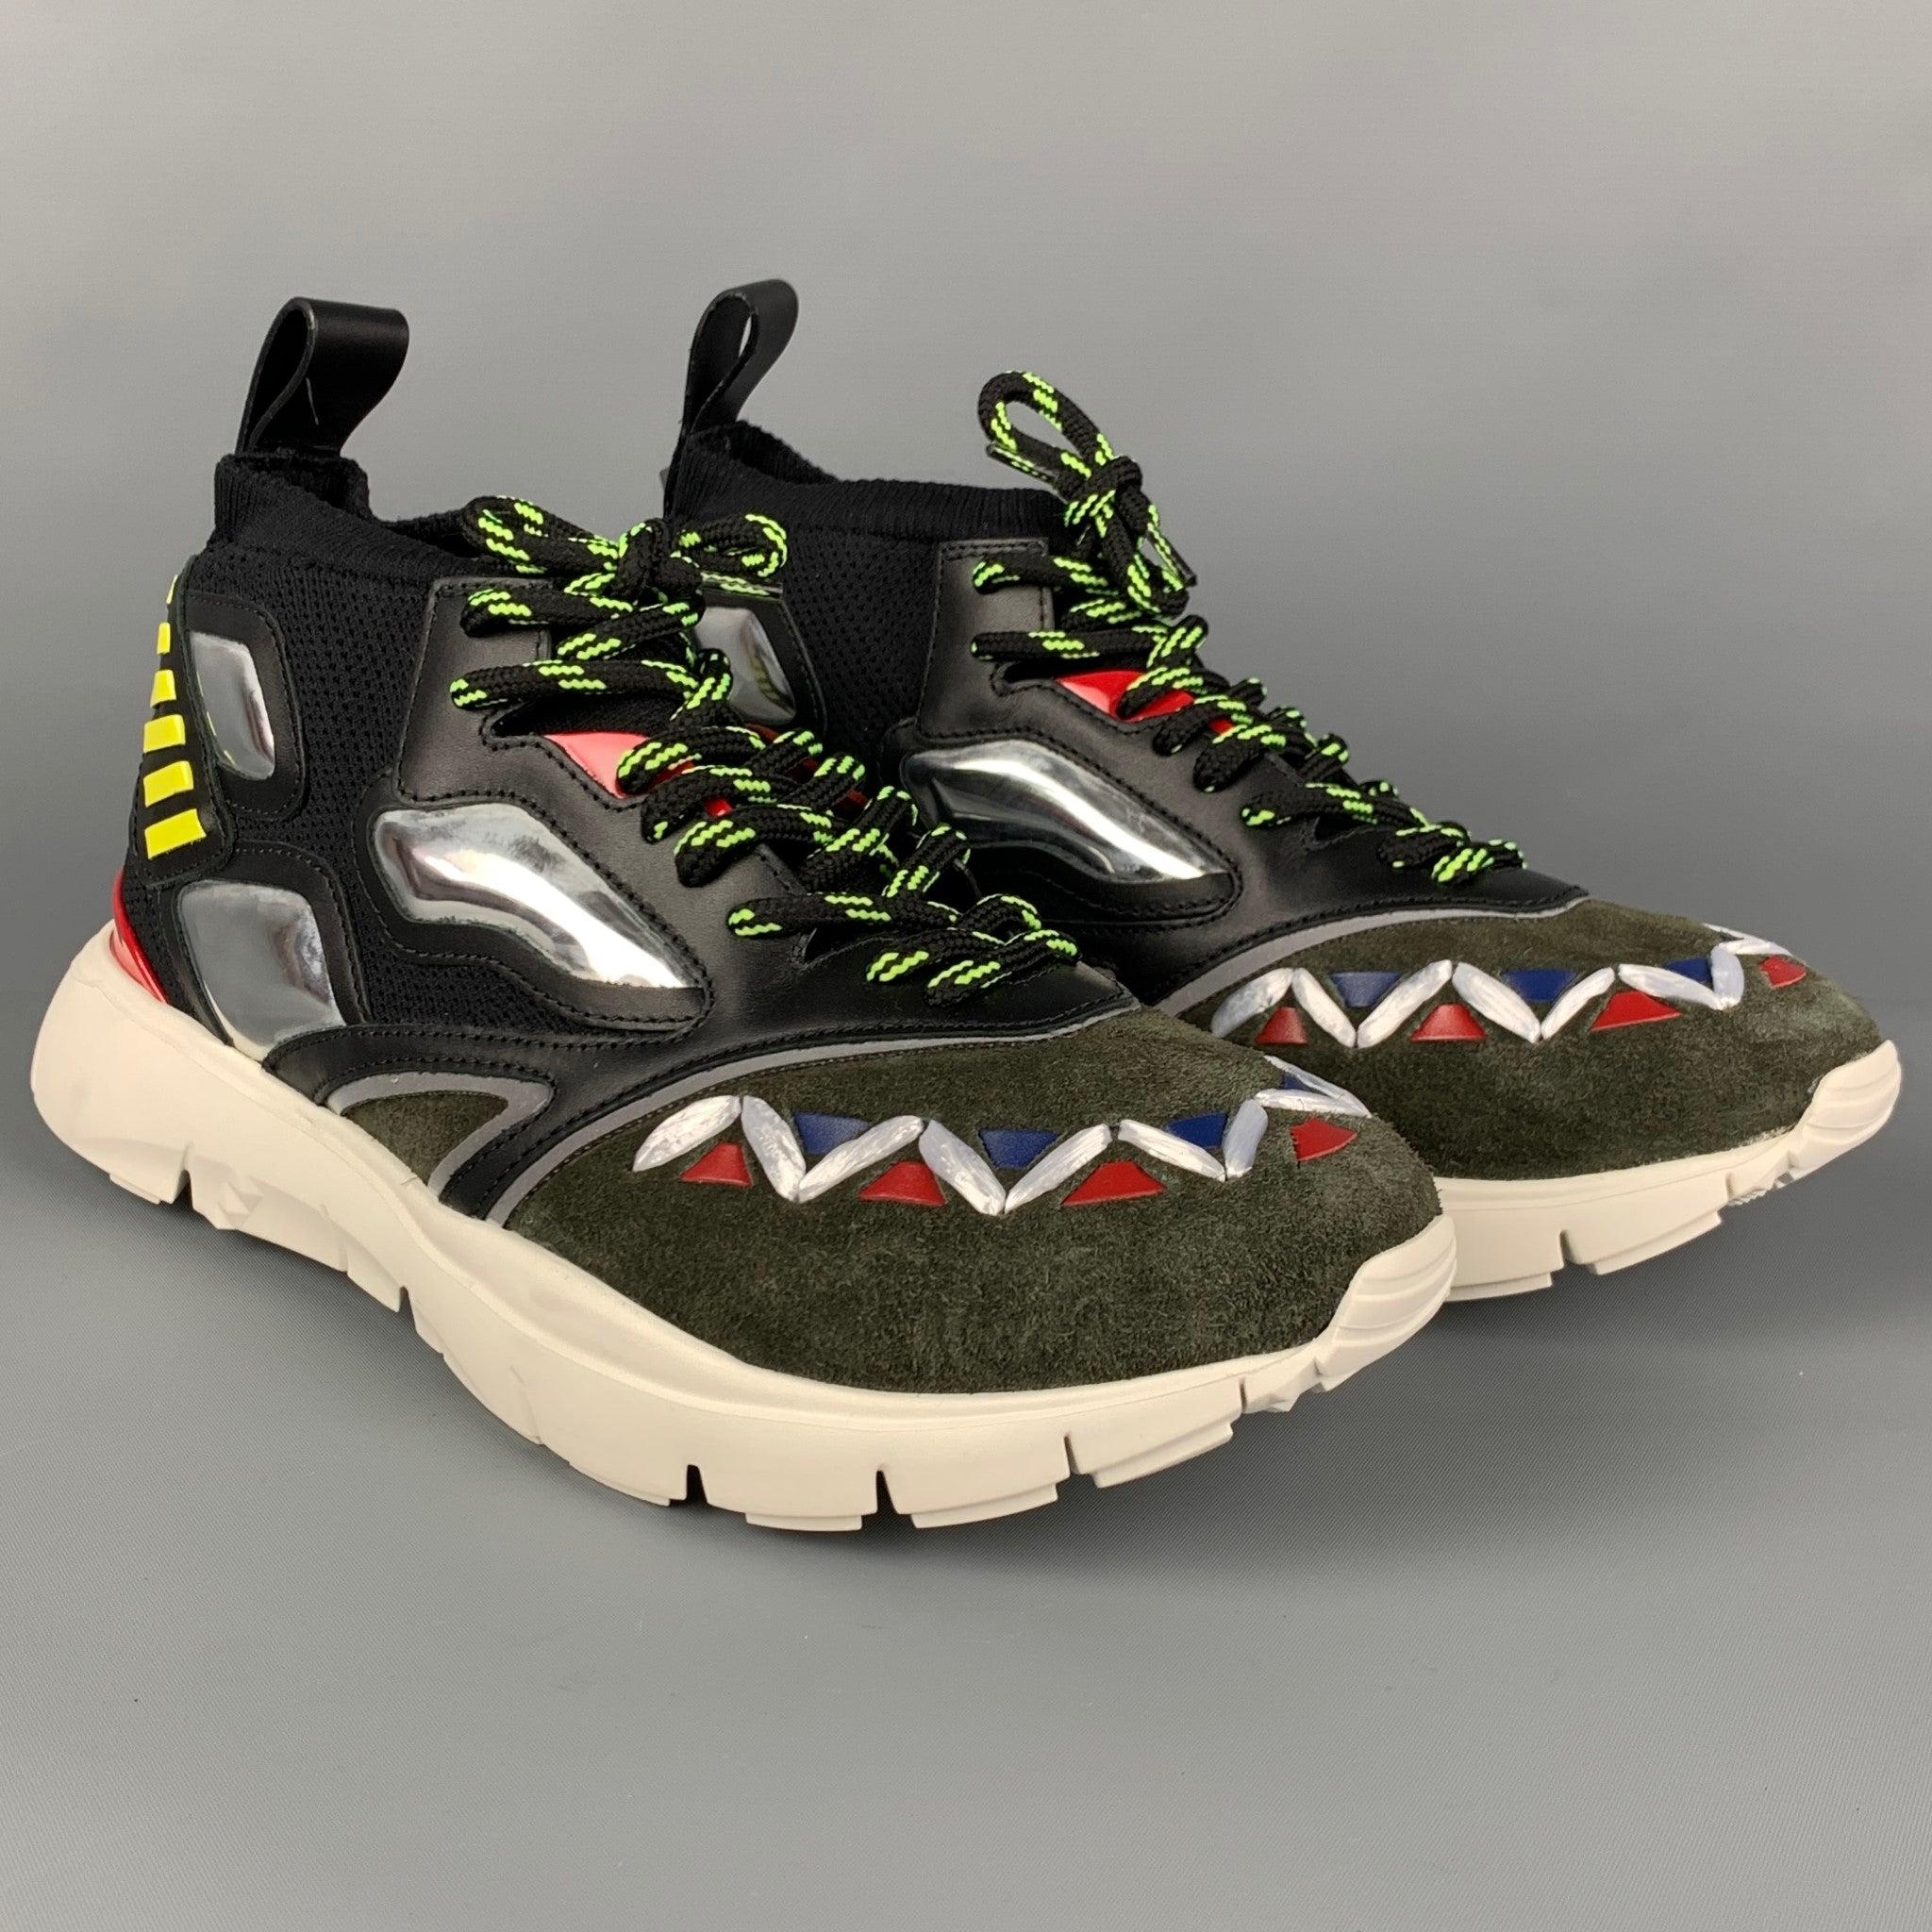 VALENTINO sneakers comes in a multi-color mixed materials featuring a low top style, metallic trim, rubber sole, and a lace up closure. Made in Italy.
New With Box. 

Marked:   42.5Outsole: 12.25 inches  x 4 inches 
  
  
 
Reference: